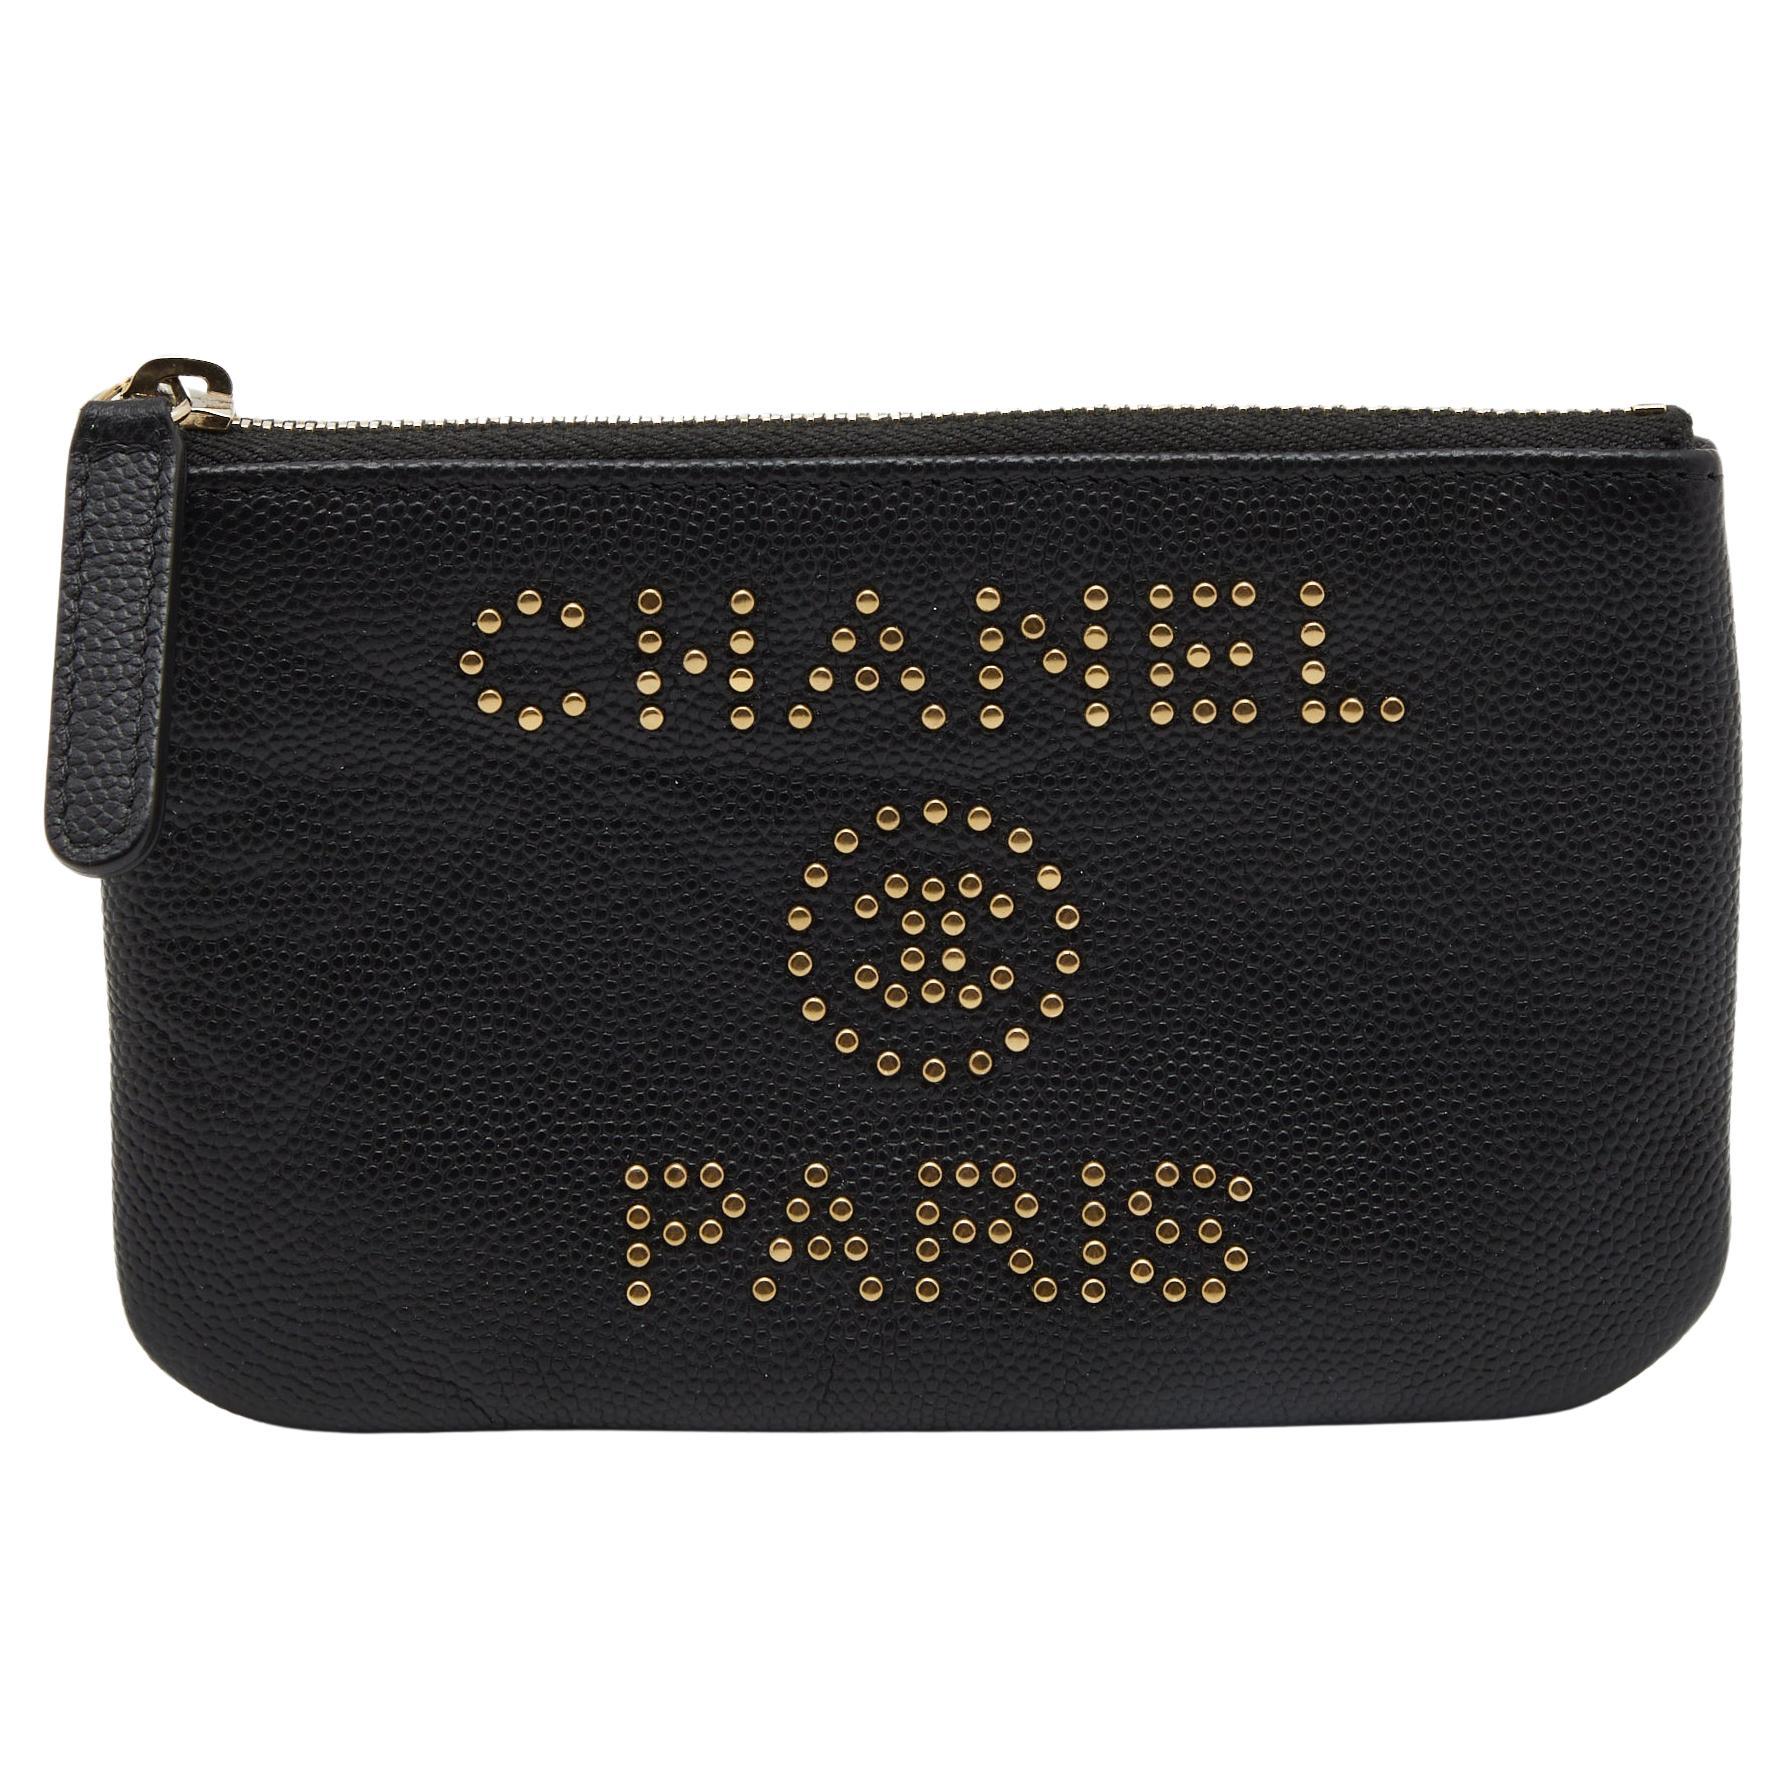 Chanel Black Caviar Leather Deauville Studded Zip Case